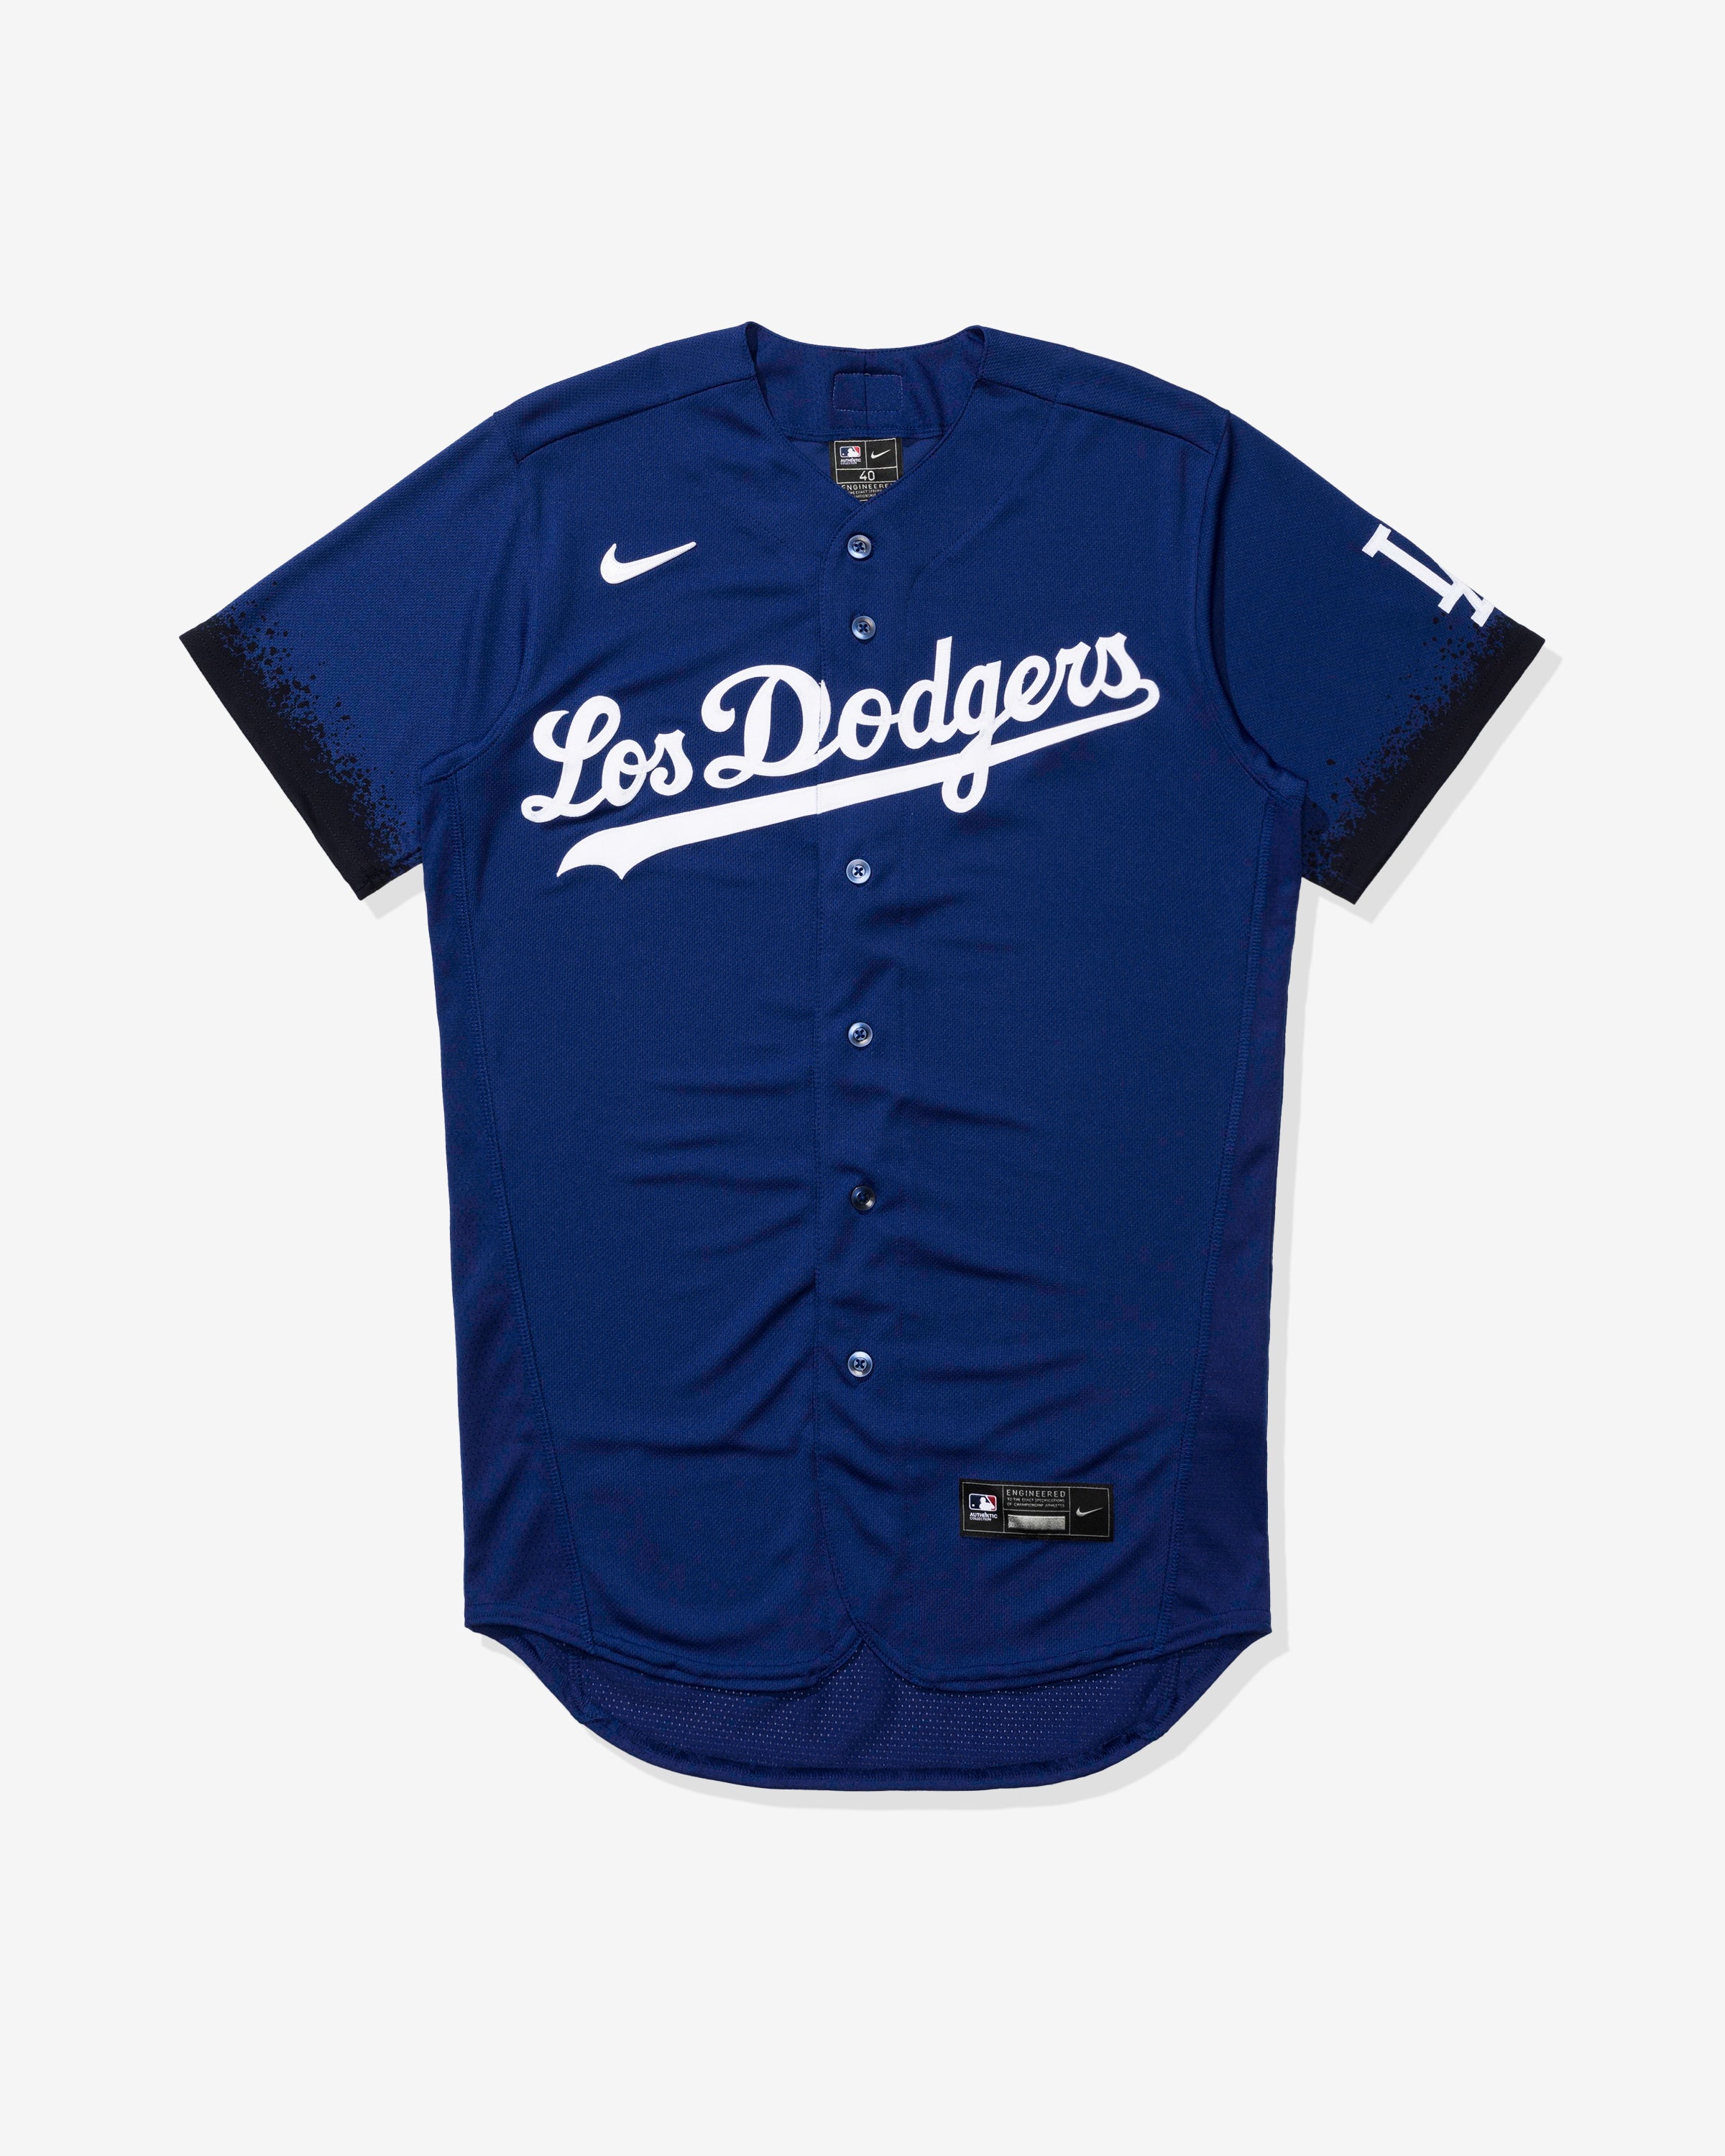 LOS DODGERS JERSEY - ROYAL – Undefeated